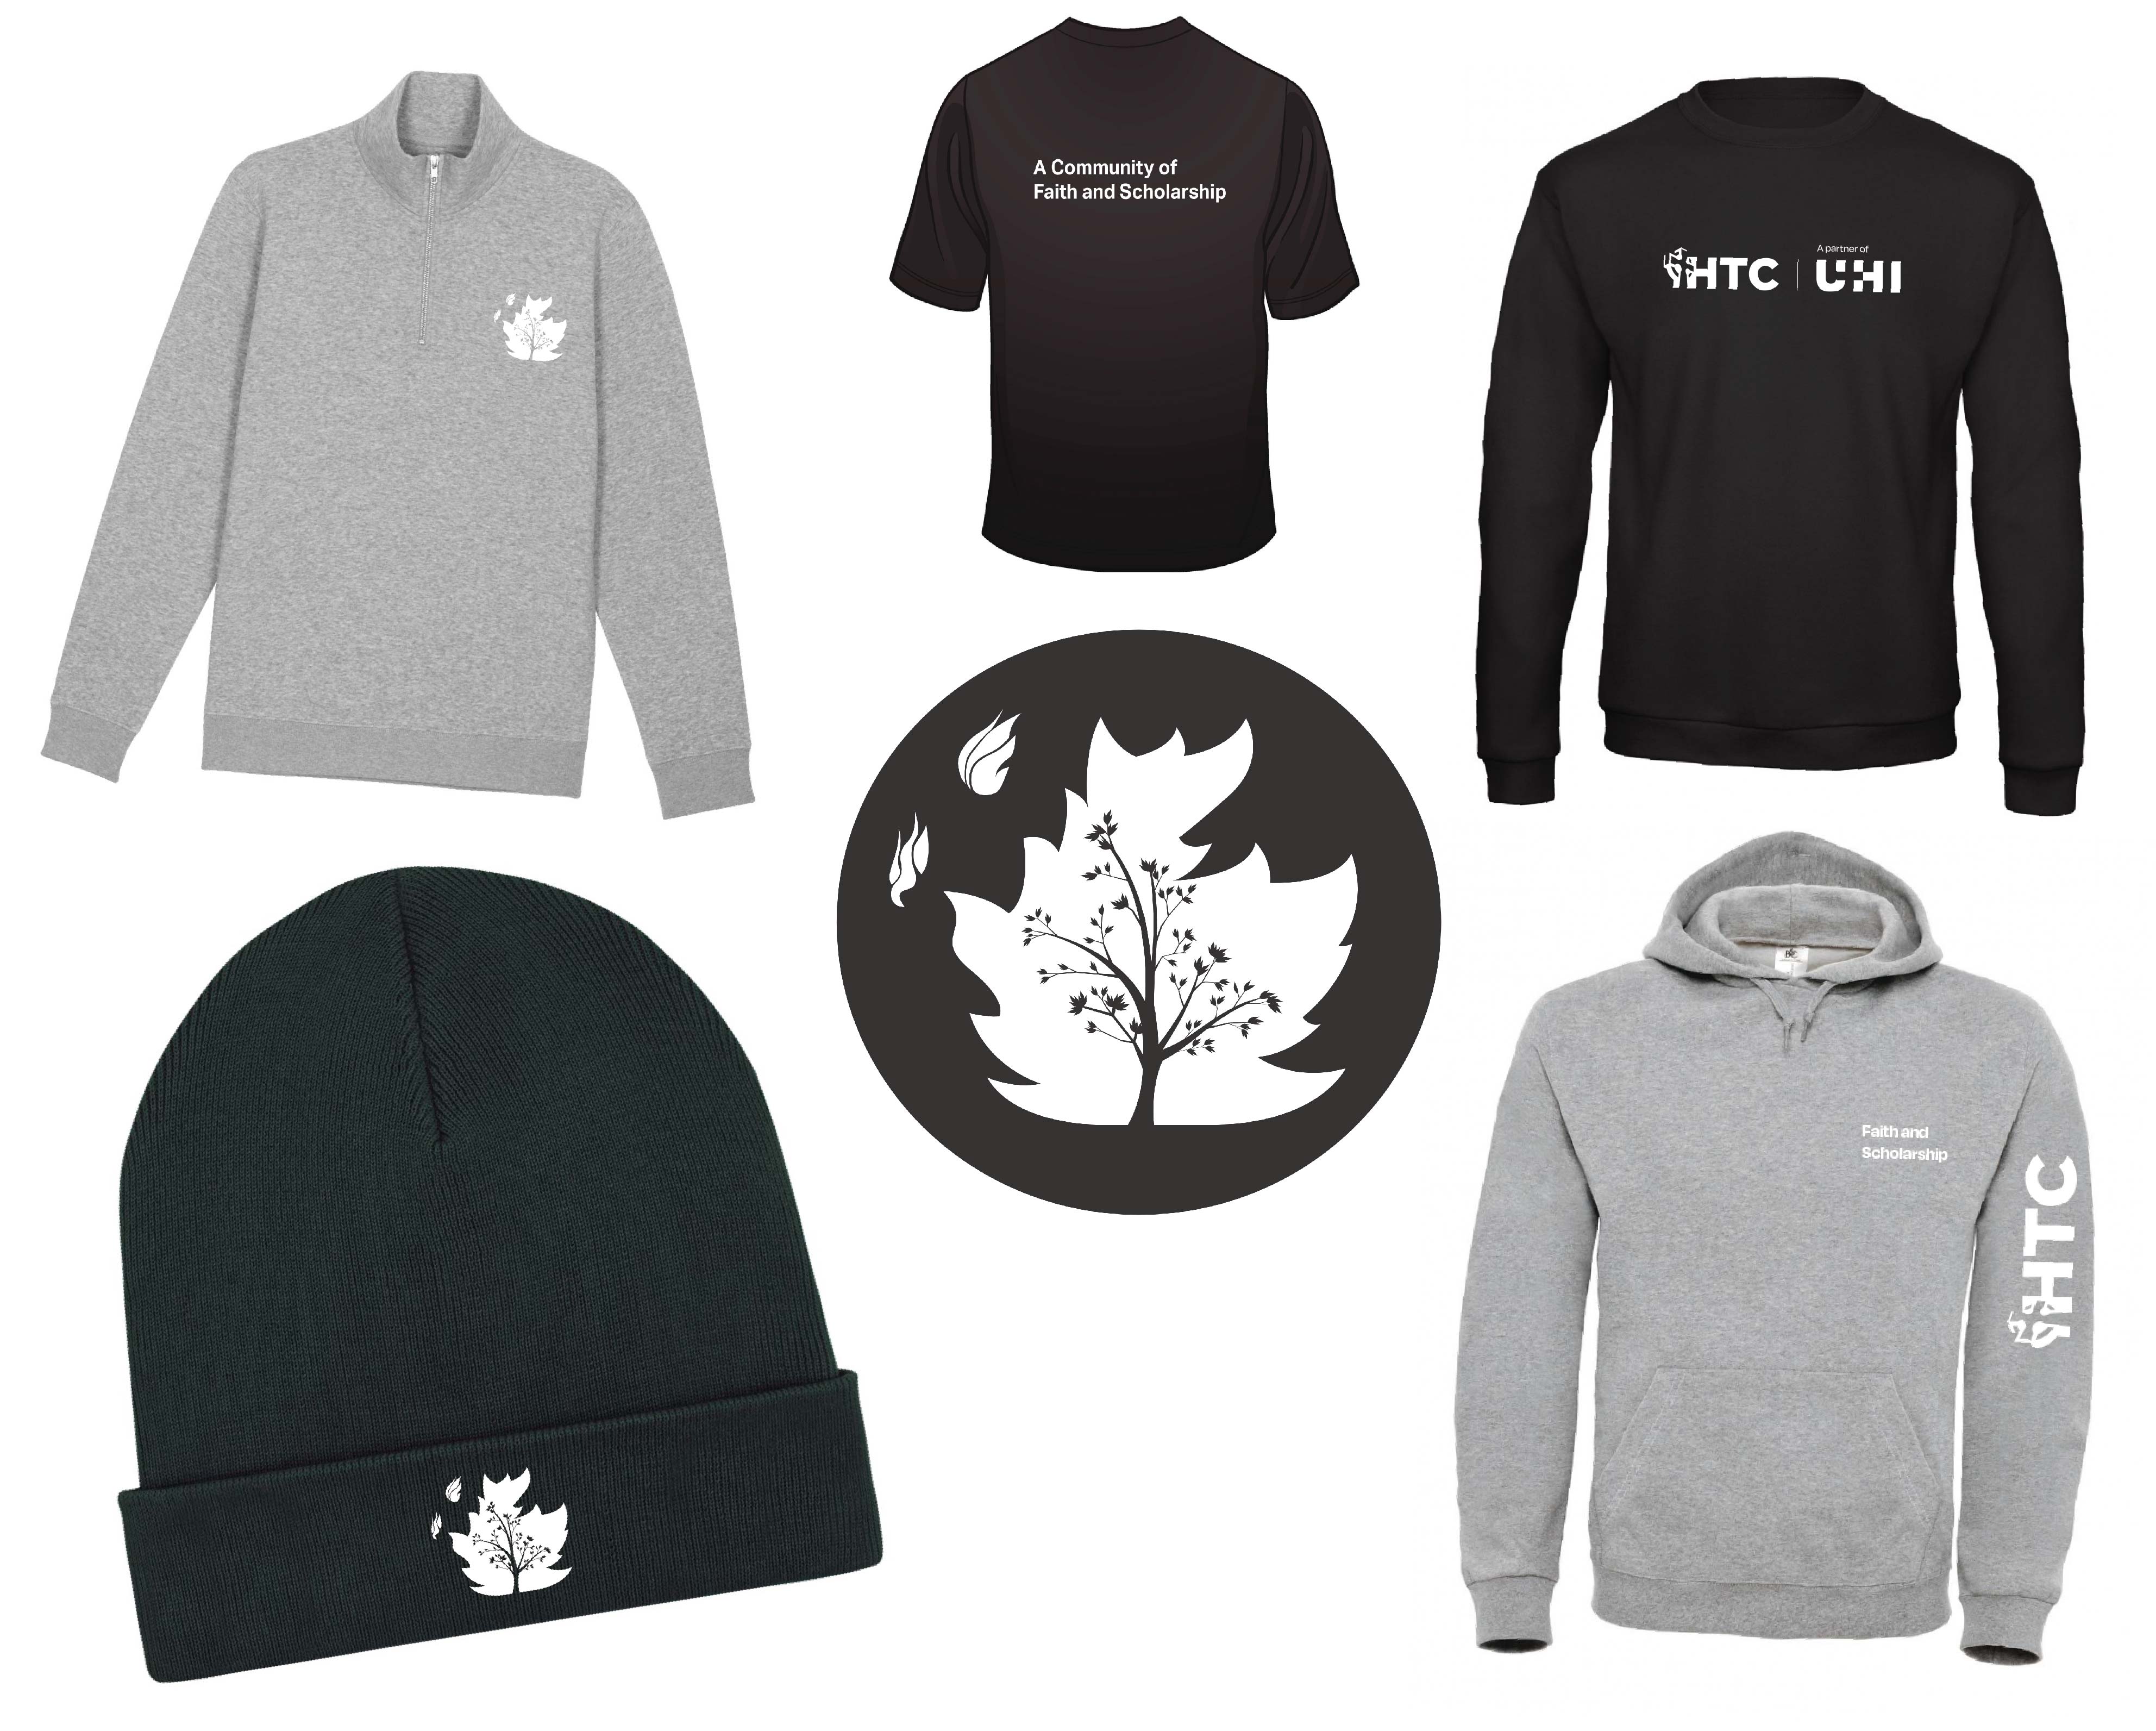 New HTC Clothing Available Now